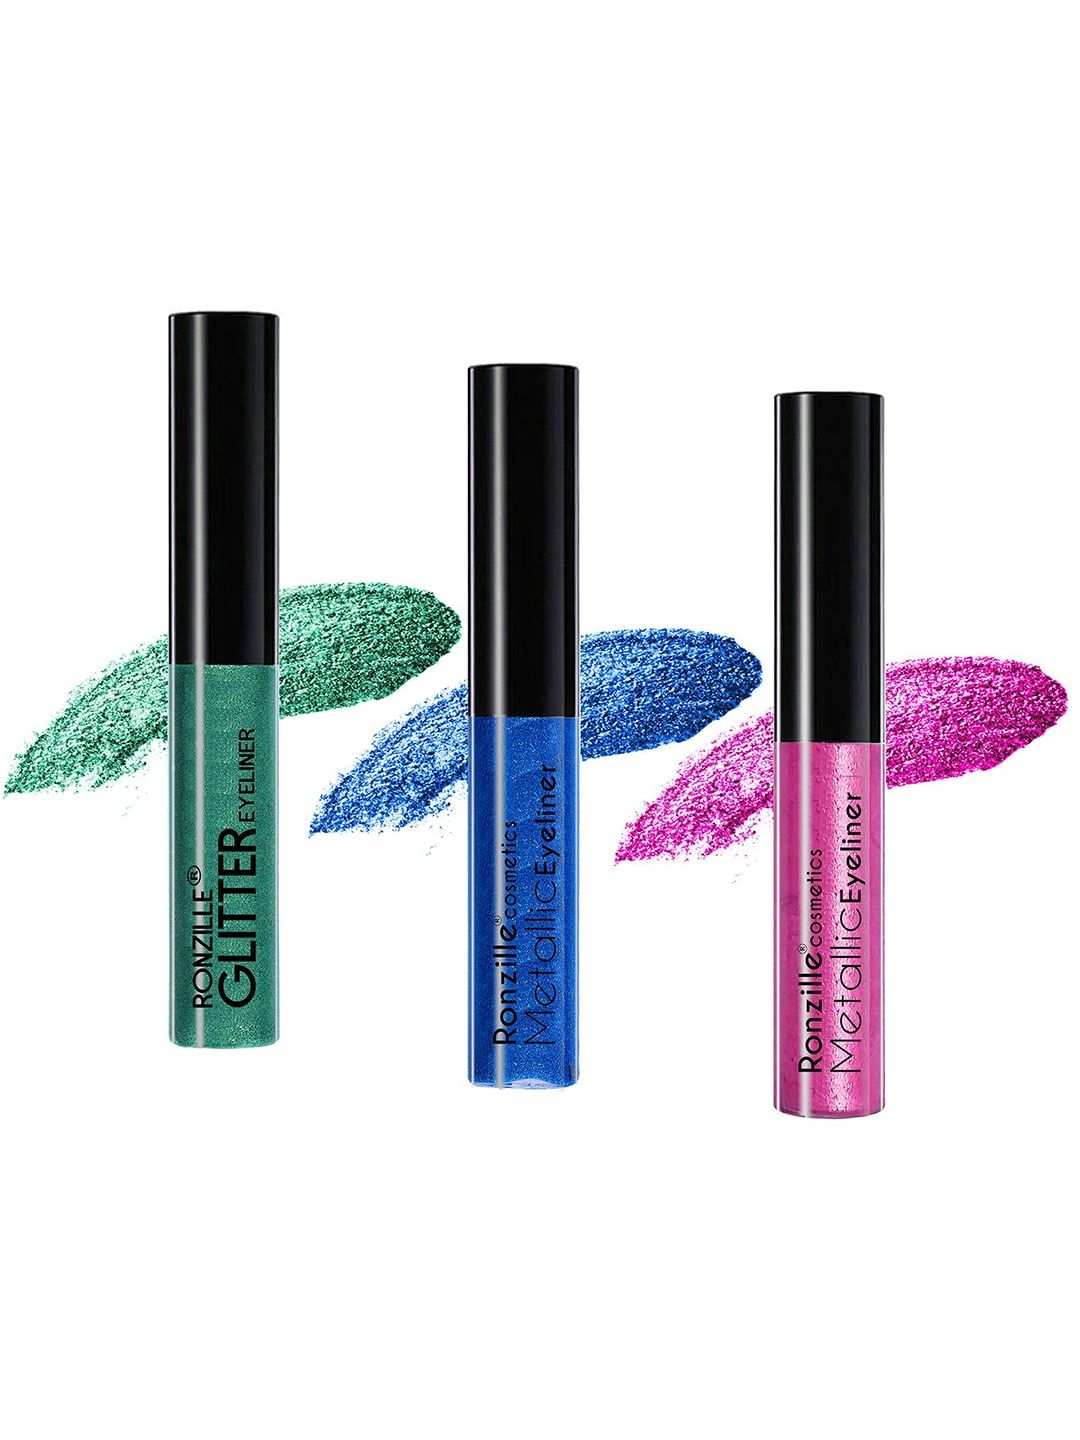 Ronzille Pack Of 3 Glitter Eyeliners Price in India